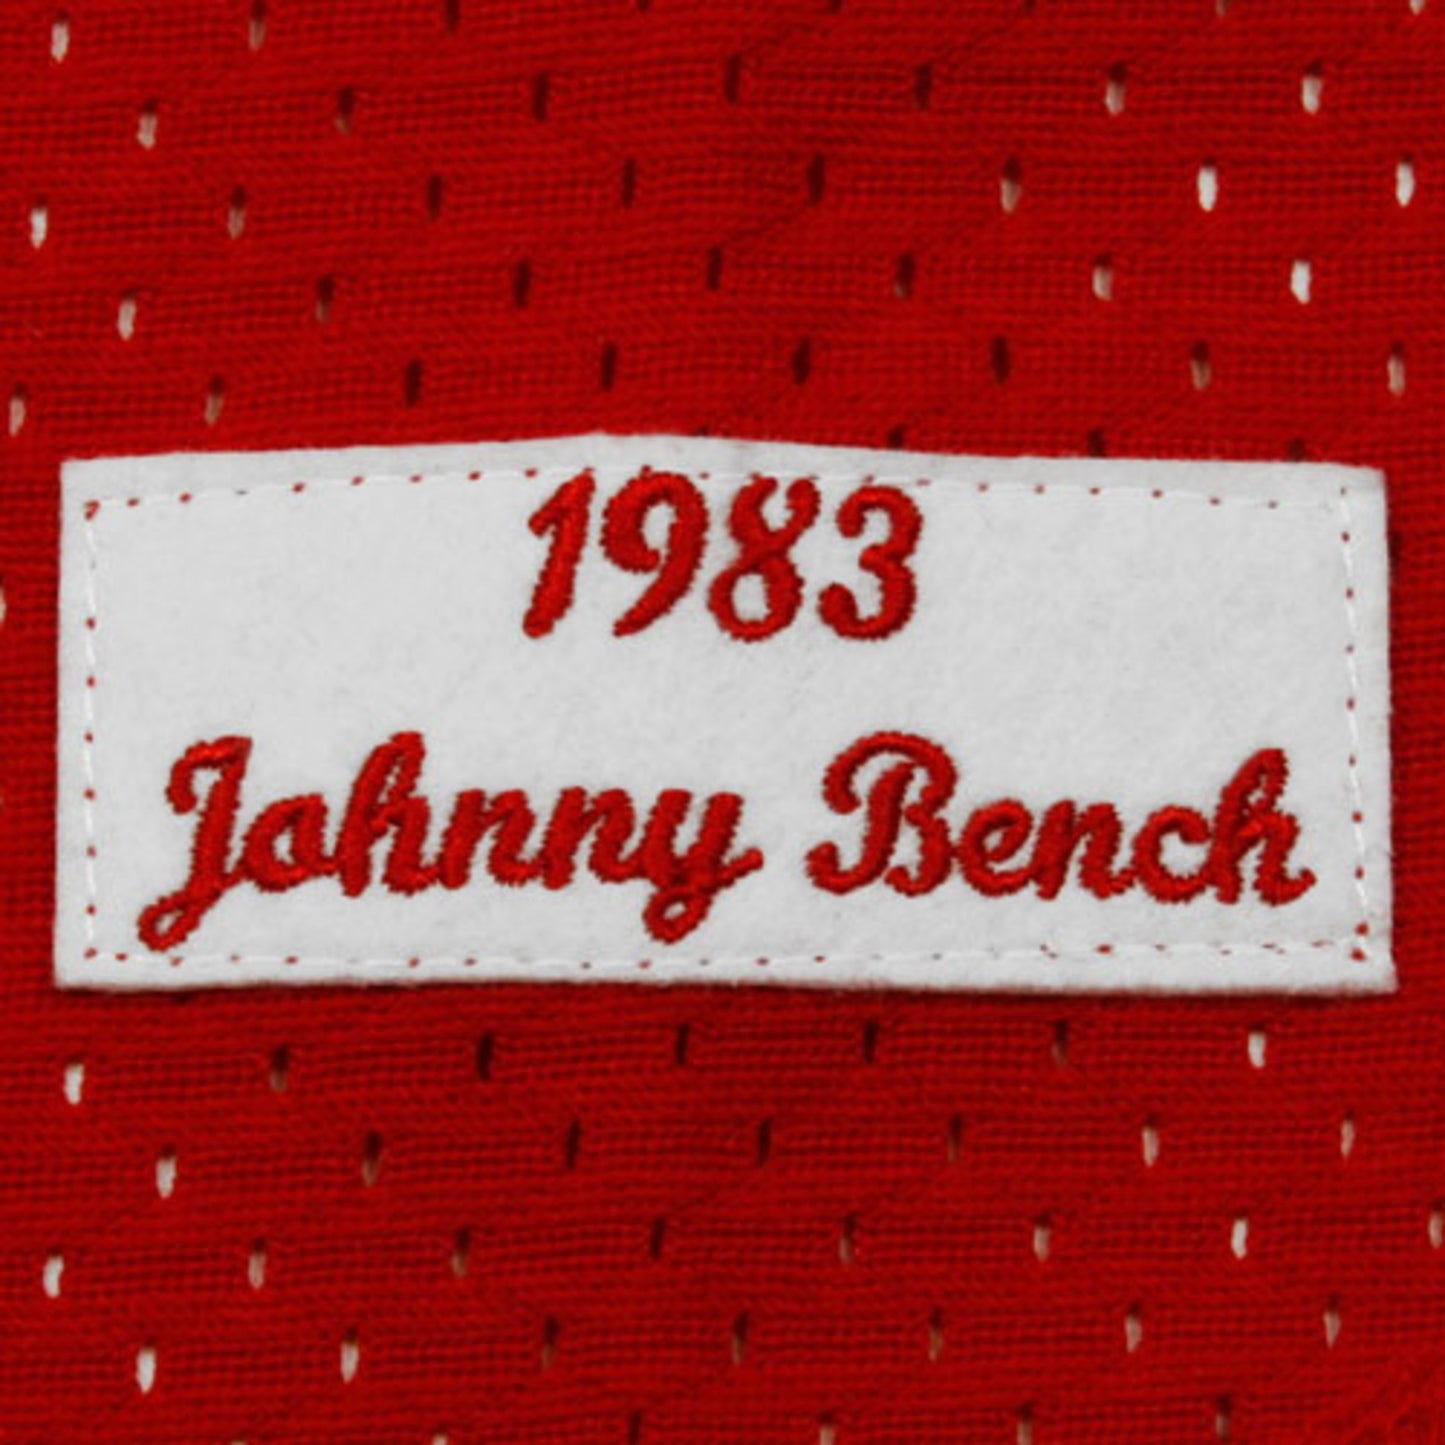 Men's Cincinnati Reds Johnny Bench Mitchell & Ness Red 1983 Authentic Cooperstown Collection Mesh Batting Practice Jersey